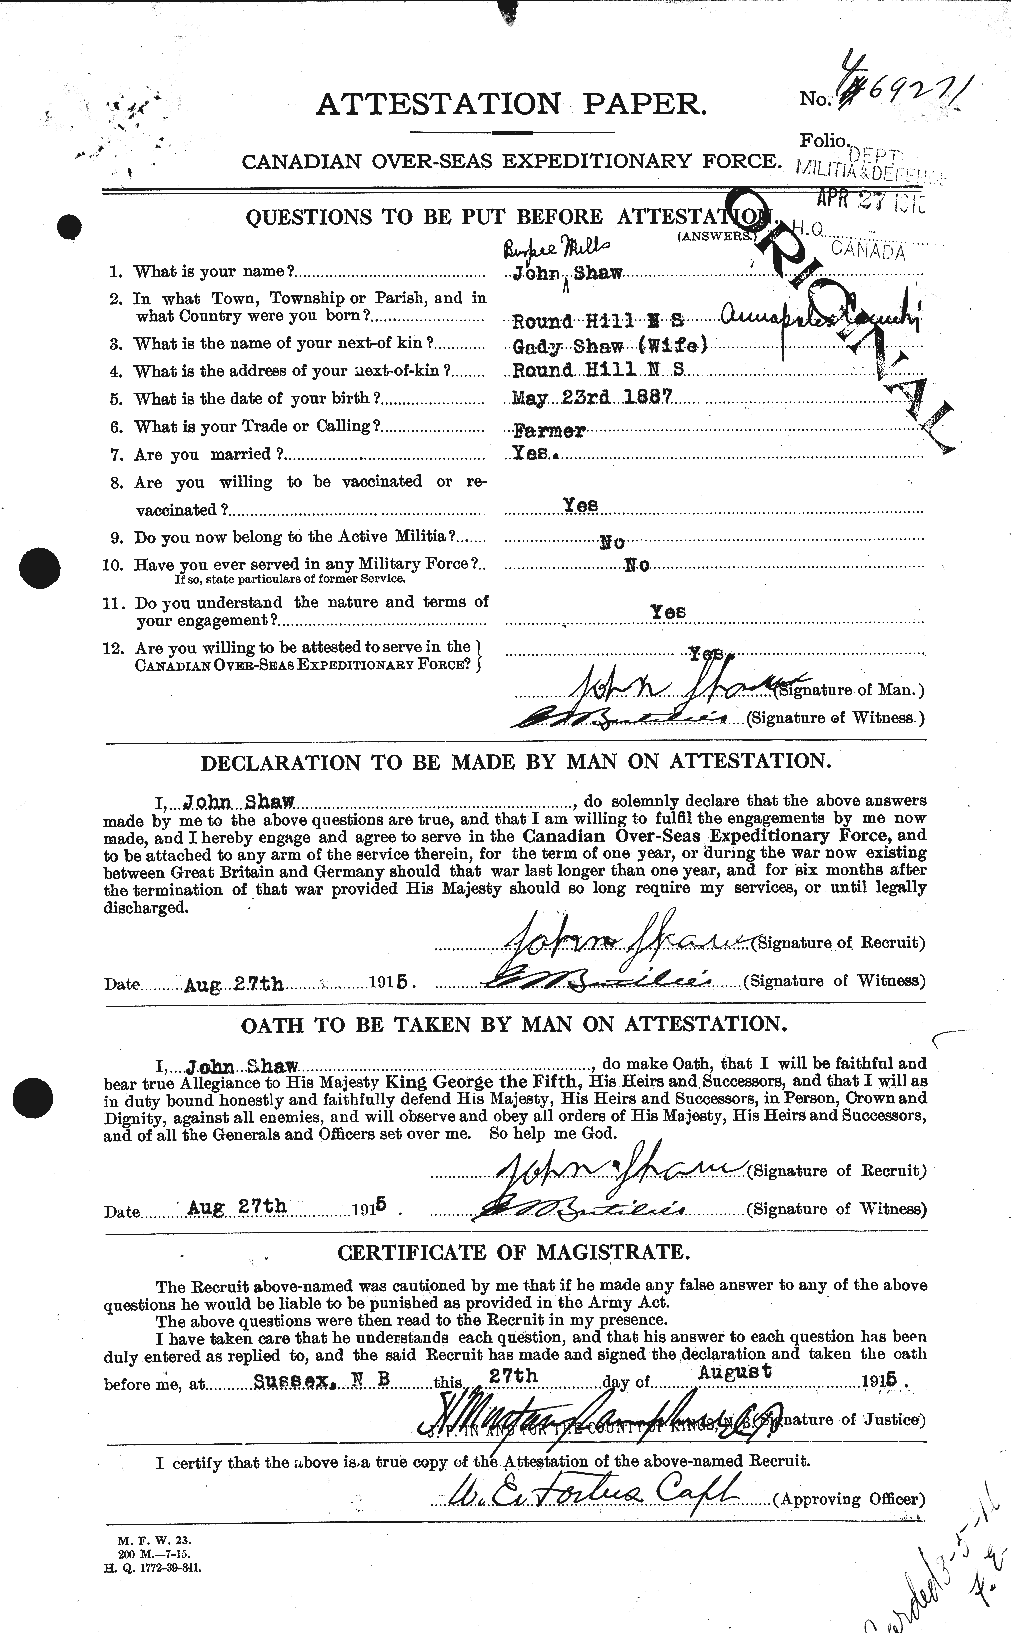 Personnel Records of the First World War - CEF 090581a